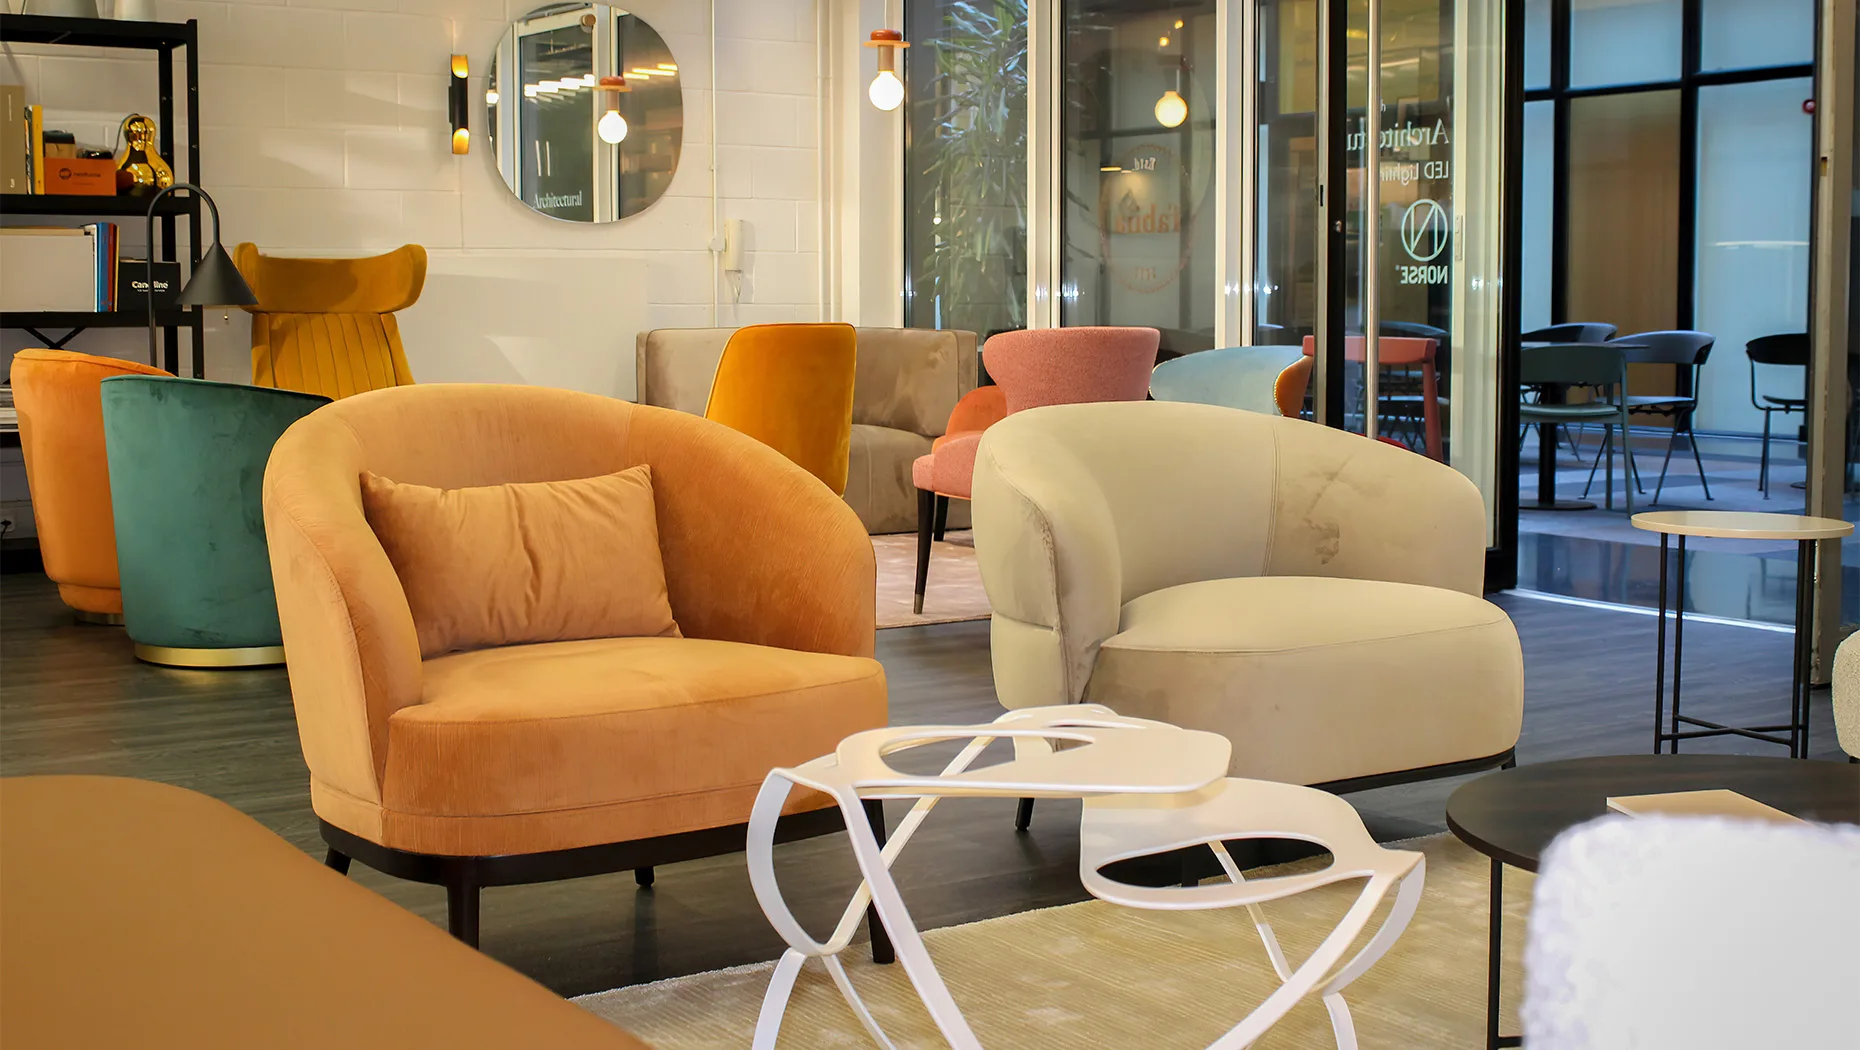 showroom display of cozy lounge armchairs with plush upholstery.